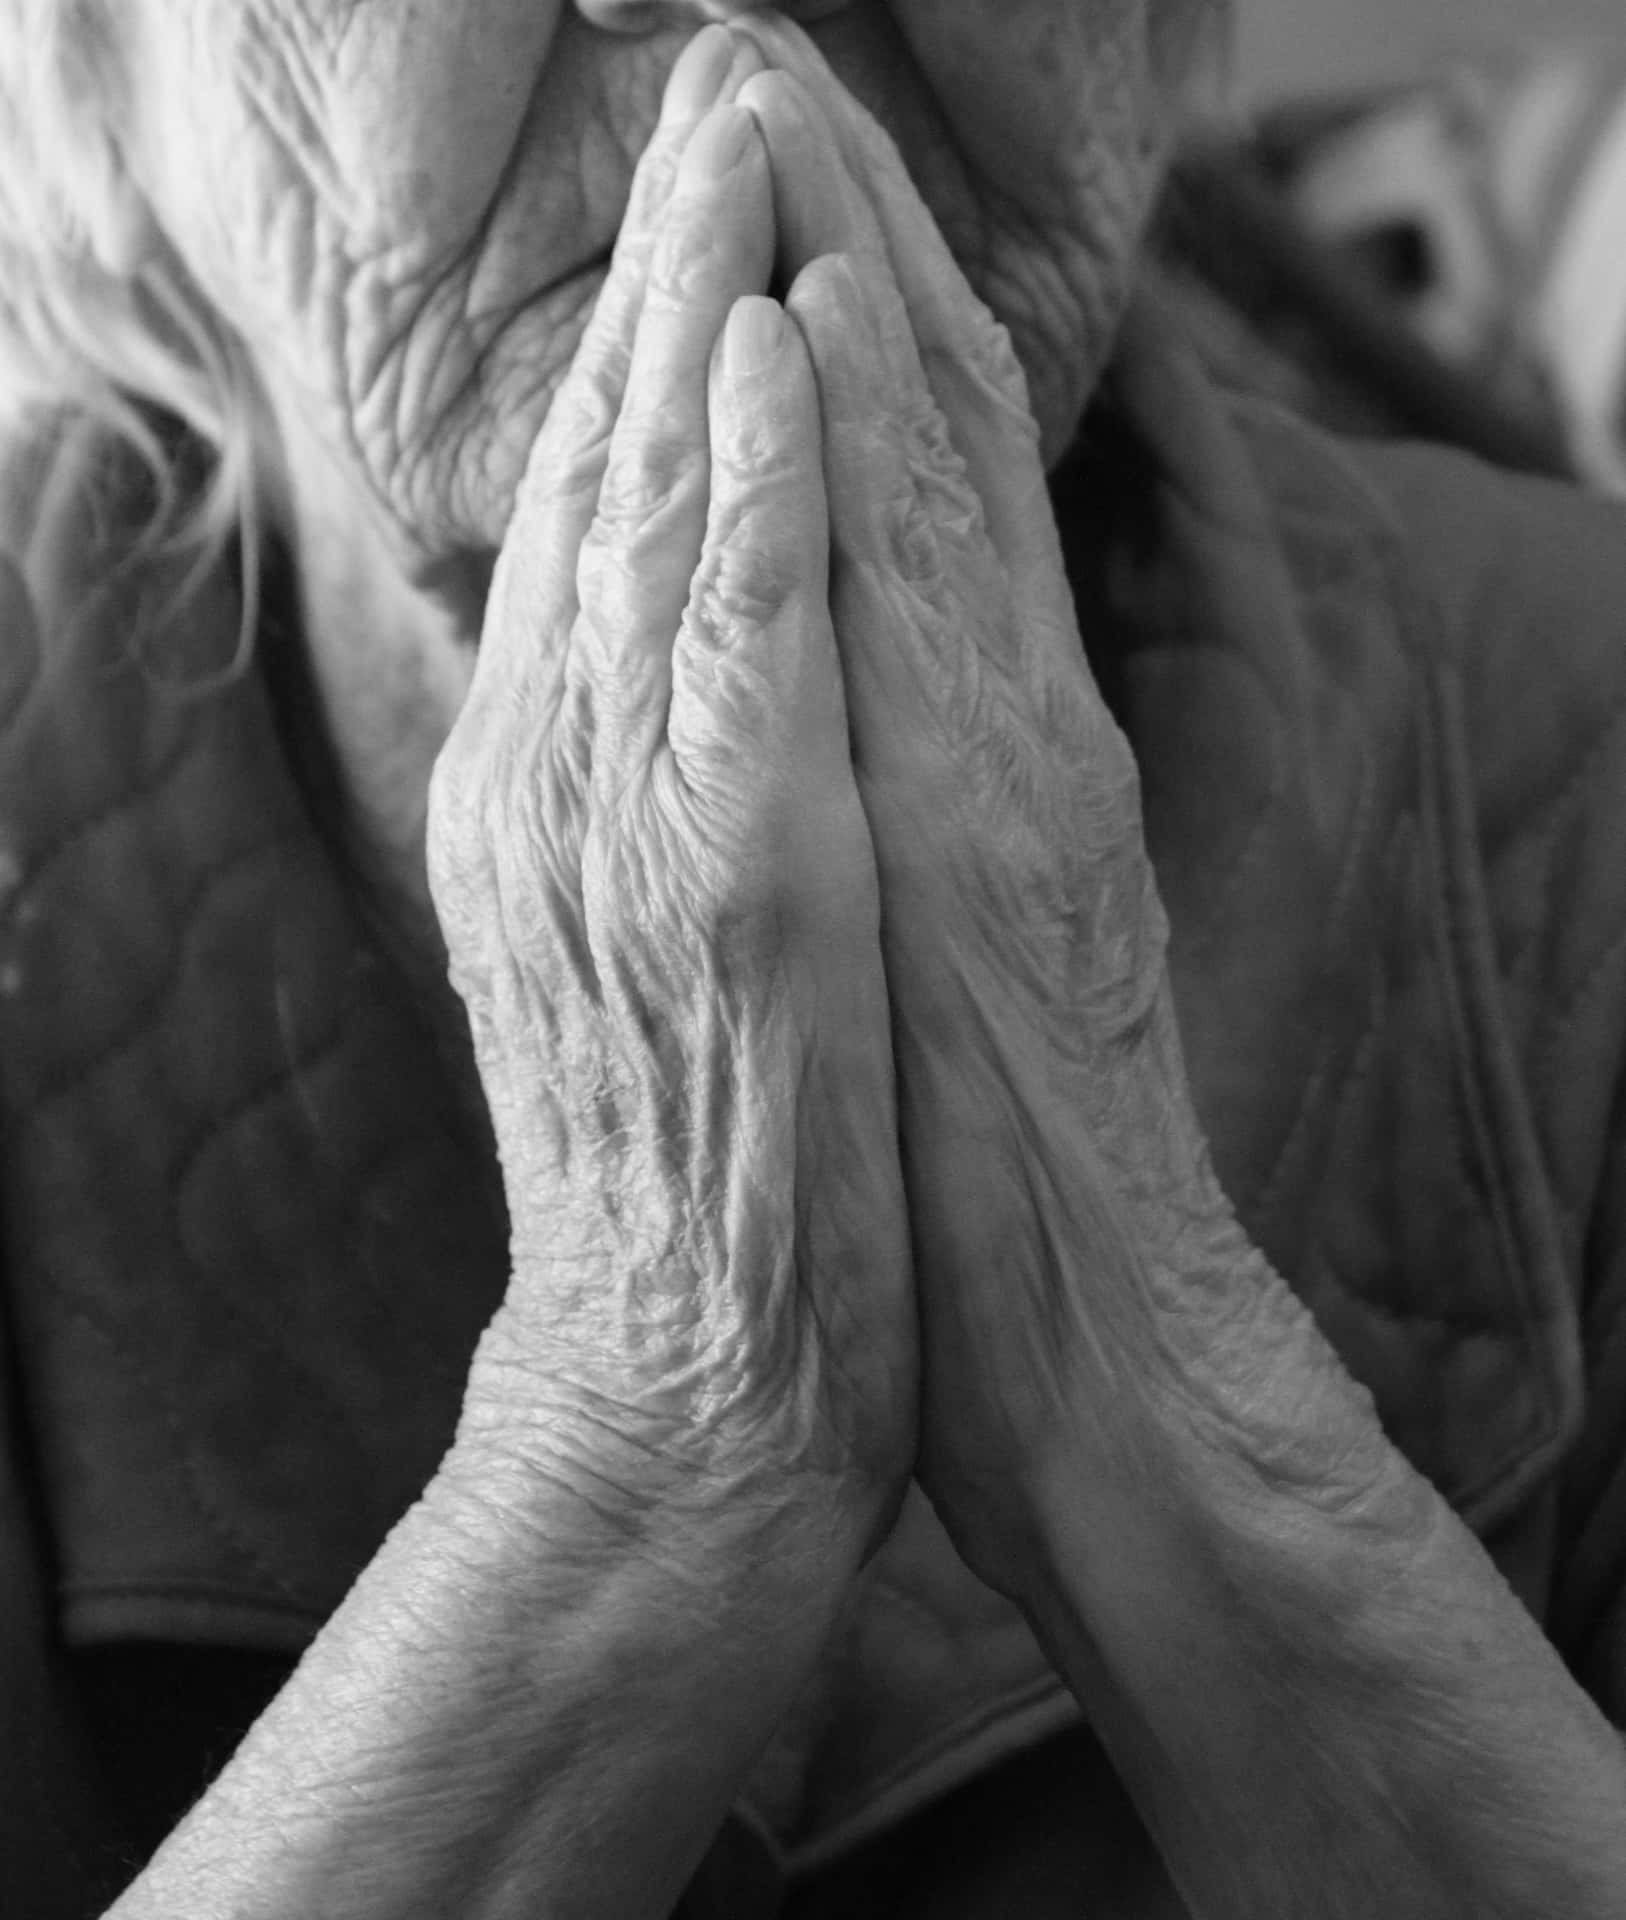 Old Woman Praying Hands Picture